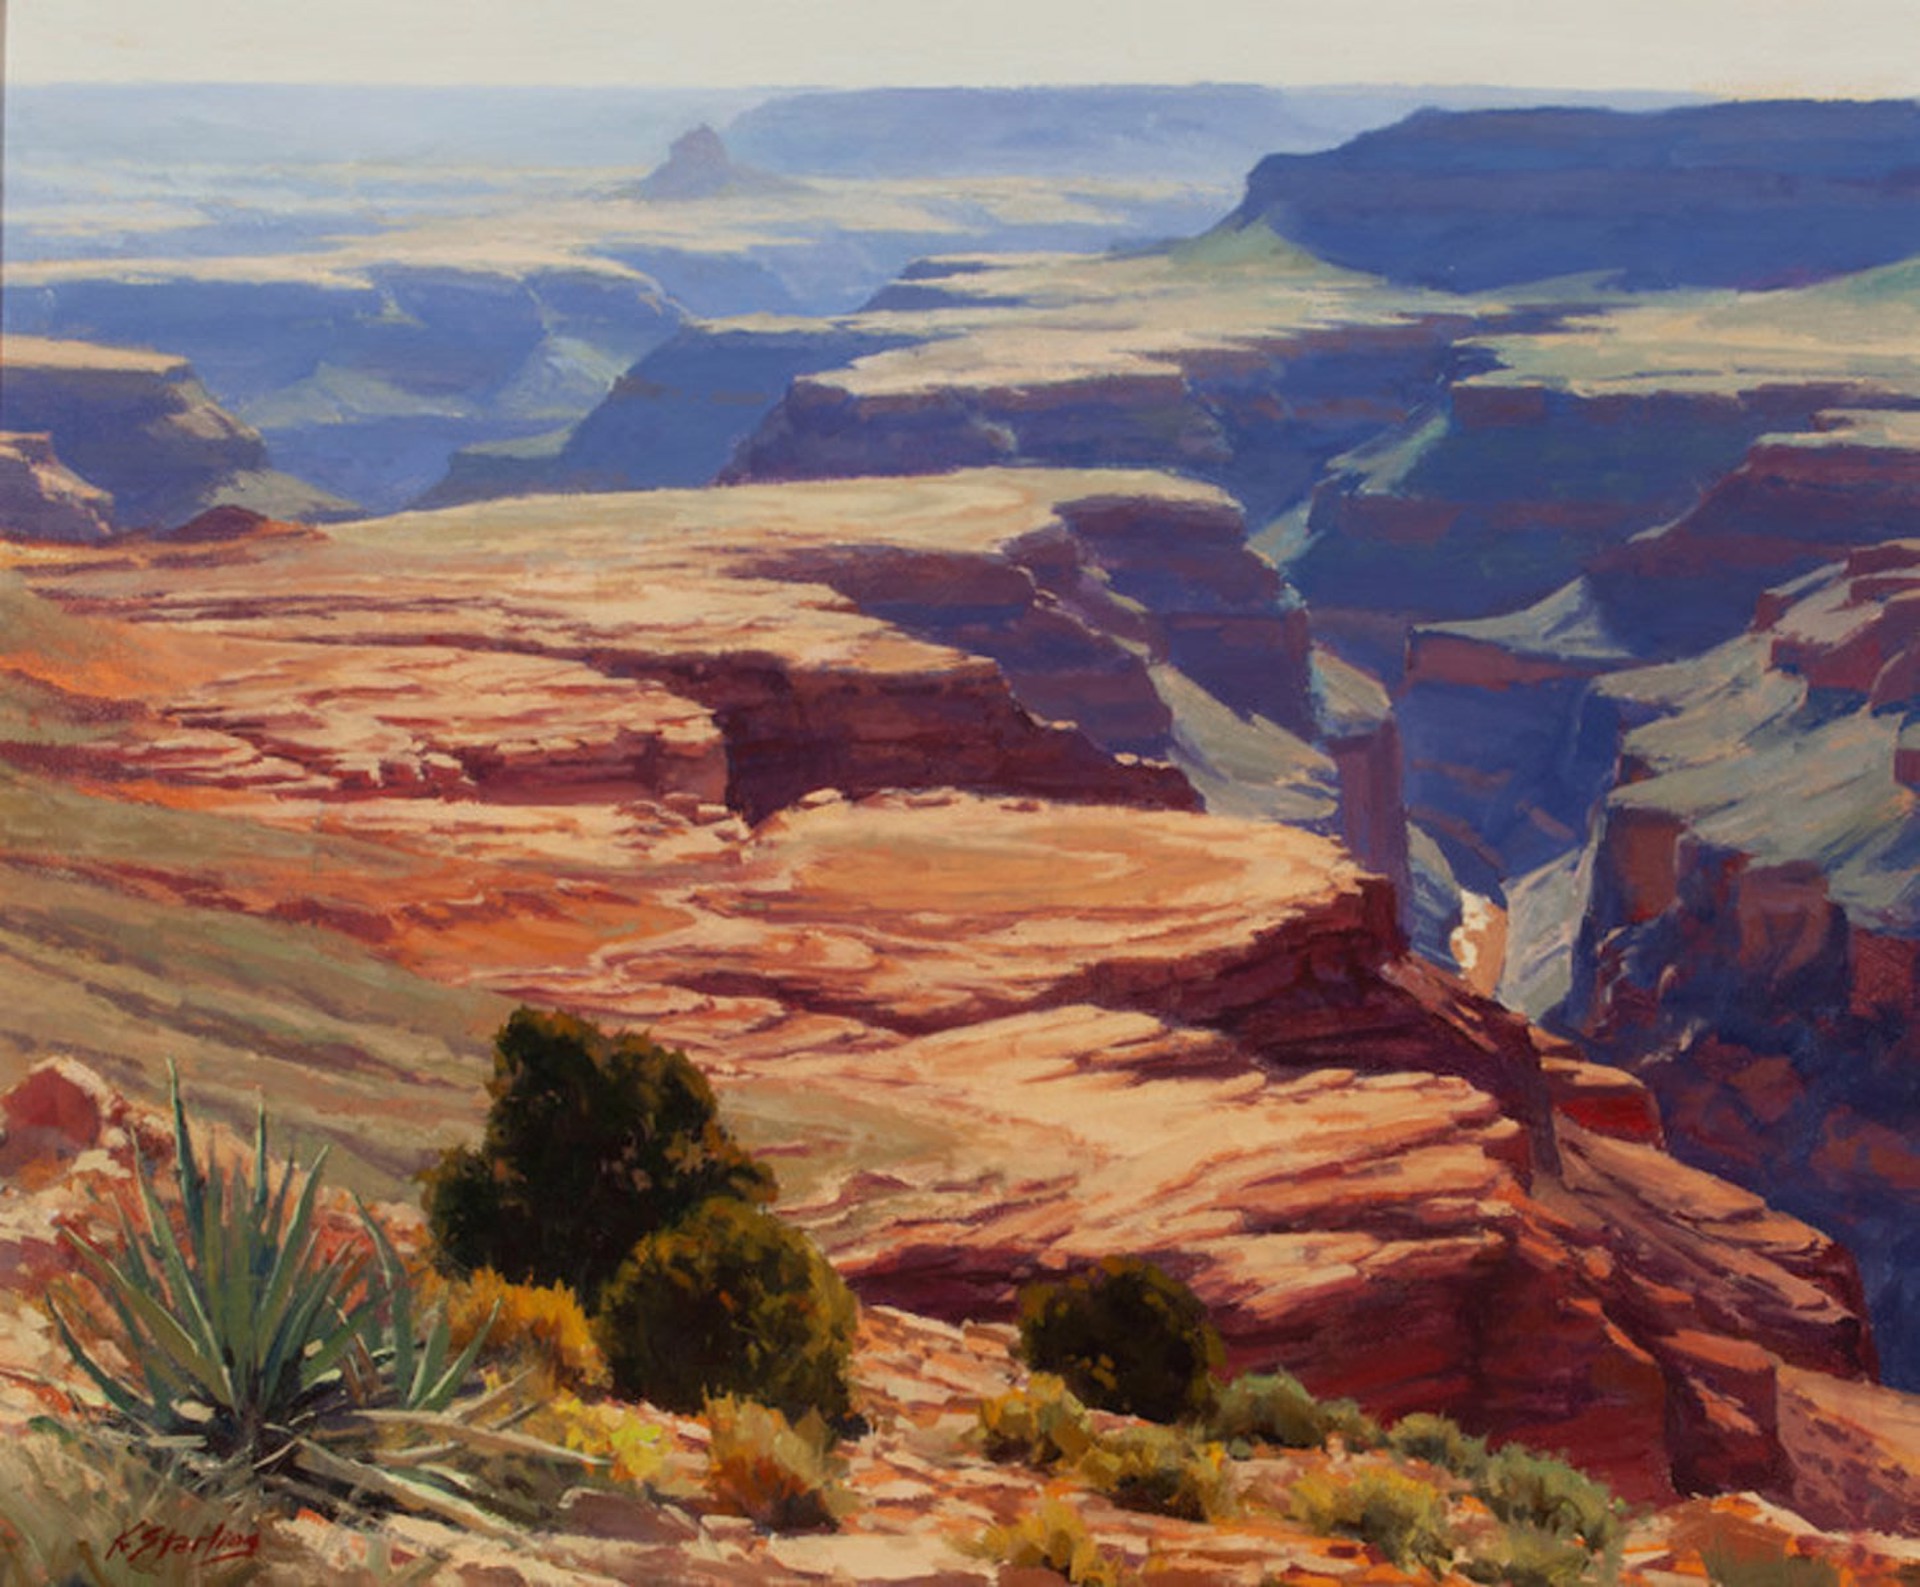 The Esplanade-Grand Canyon by Kate Starling